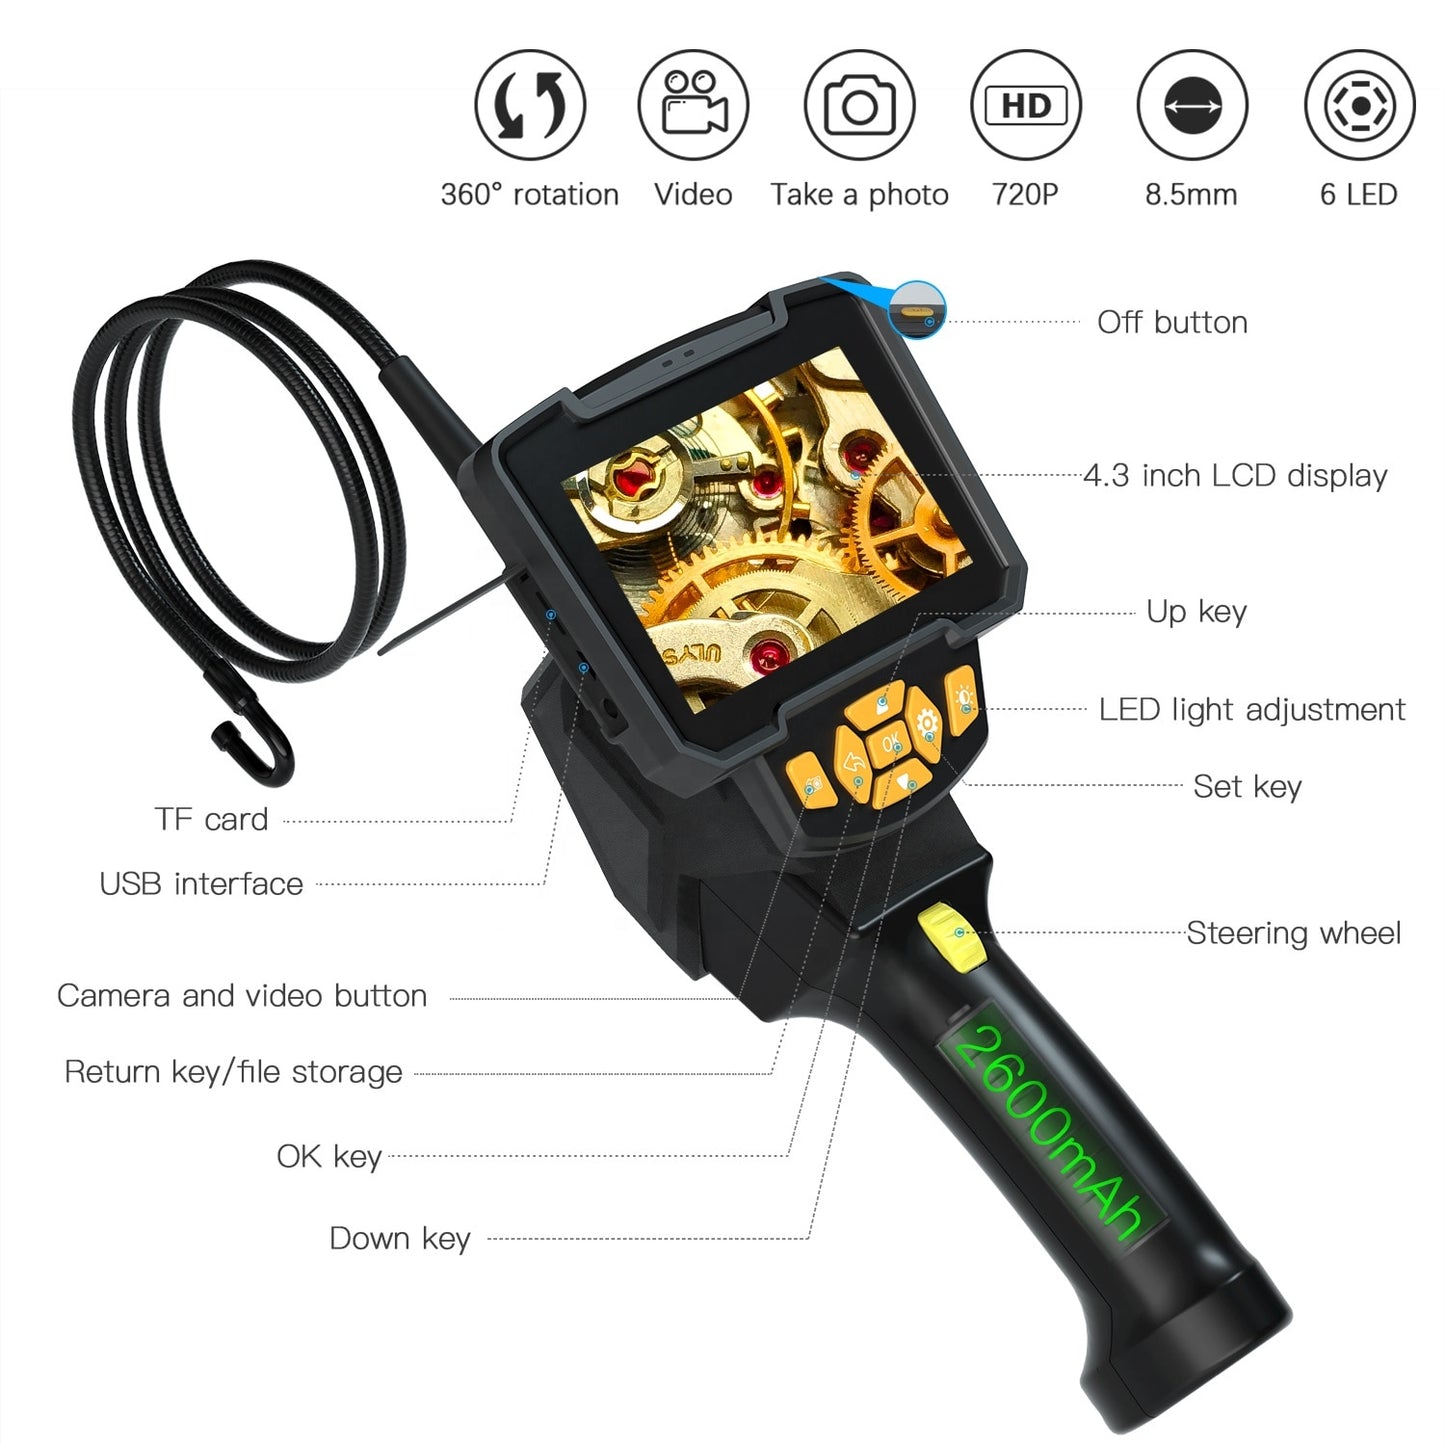 Borescope Inspection Camera - 4.3in screen with 180/360 Degree Rotation